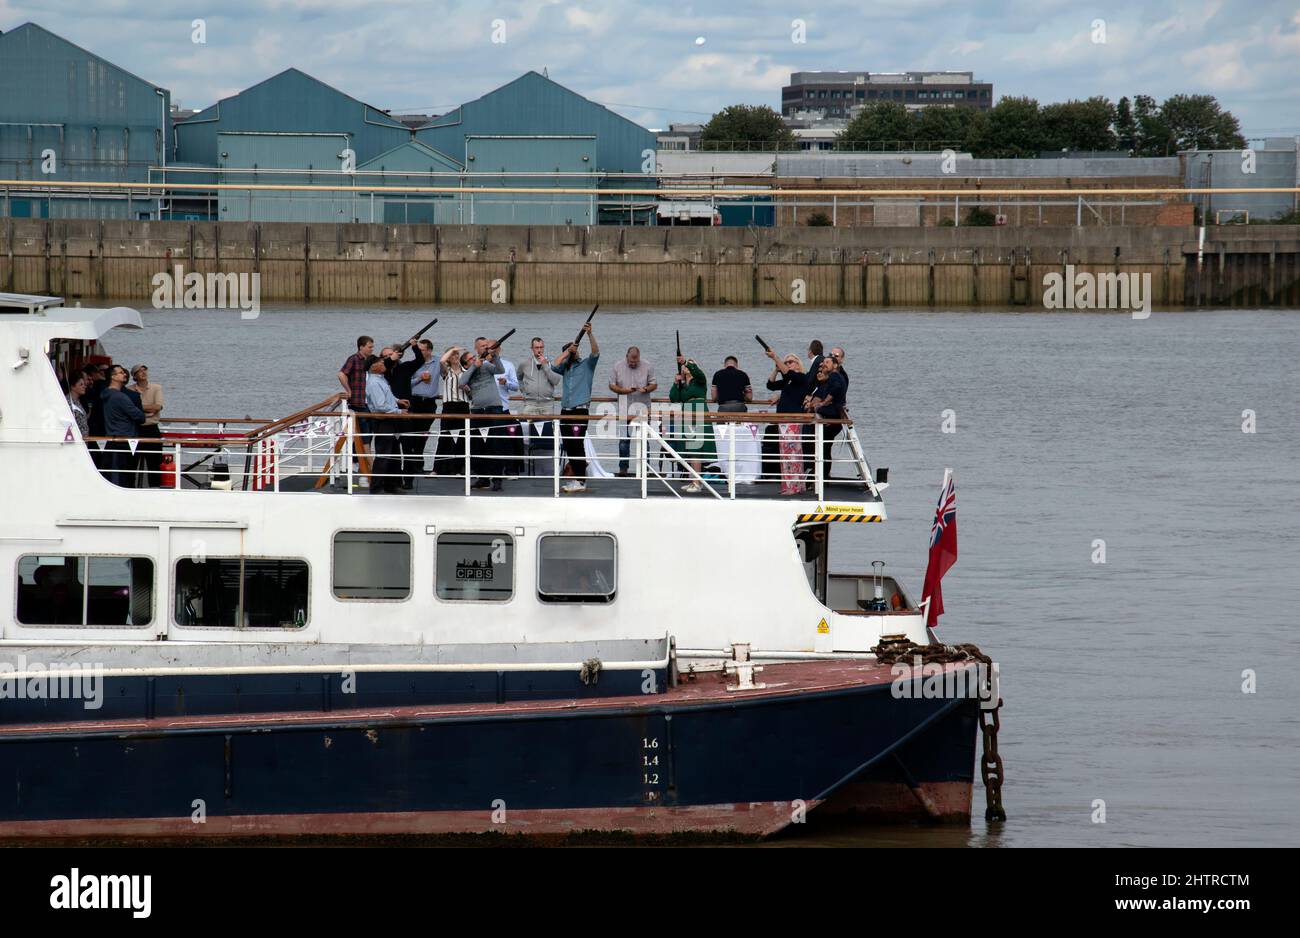 London, UK - September 17th 2021: People shooting clay pigeons on a boat on river Thames Stock Photo